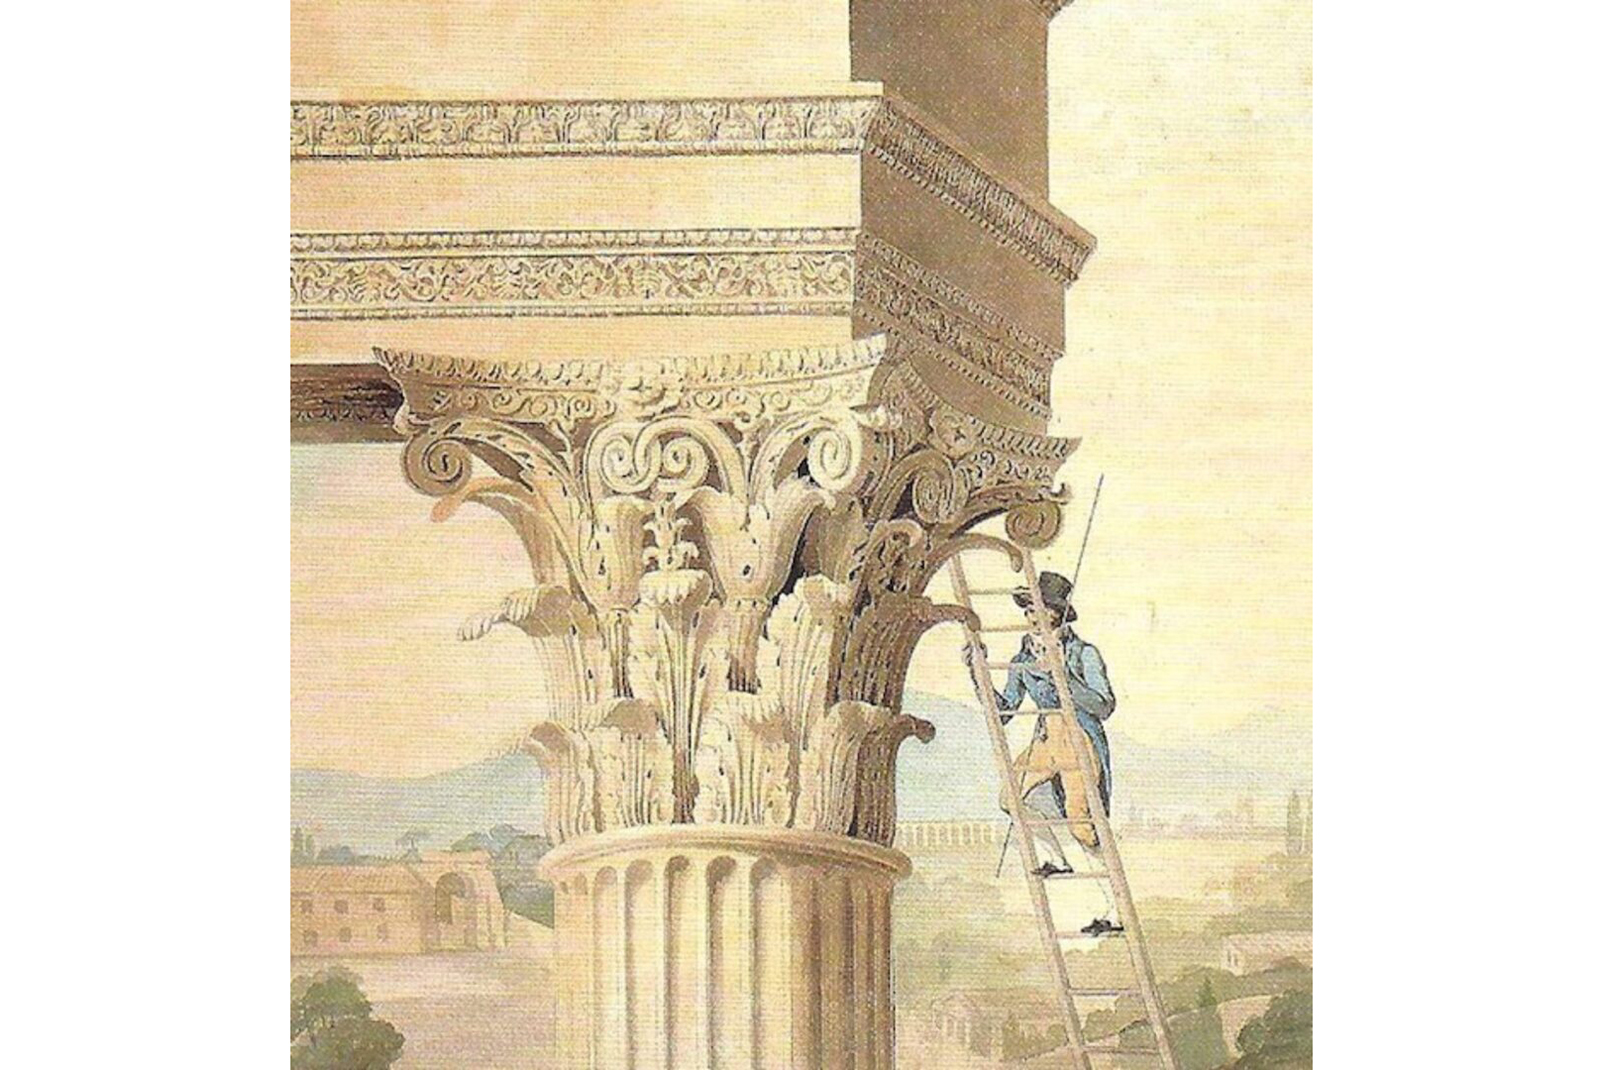 Henry Parke, Student Measuring the Temple of Castor and Pollux (detail) Sir John Soane’s Museum